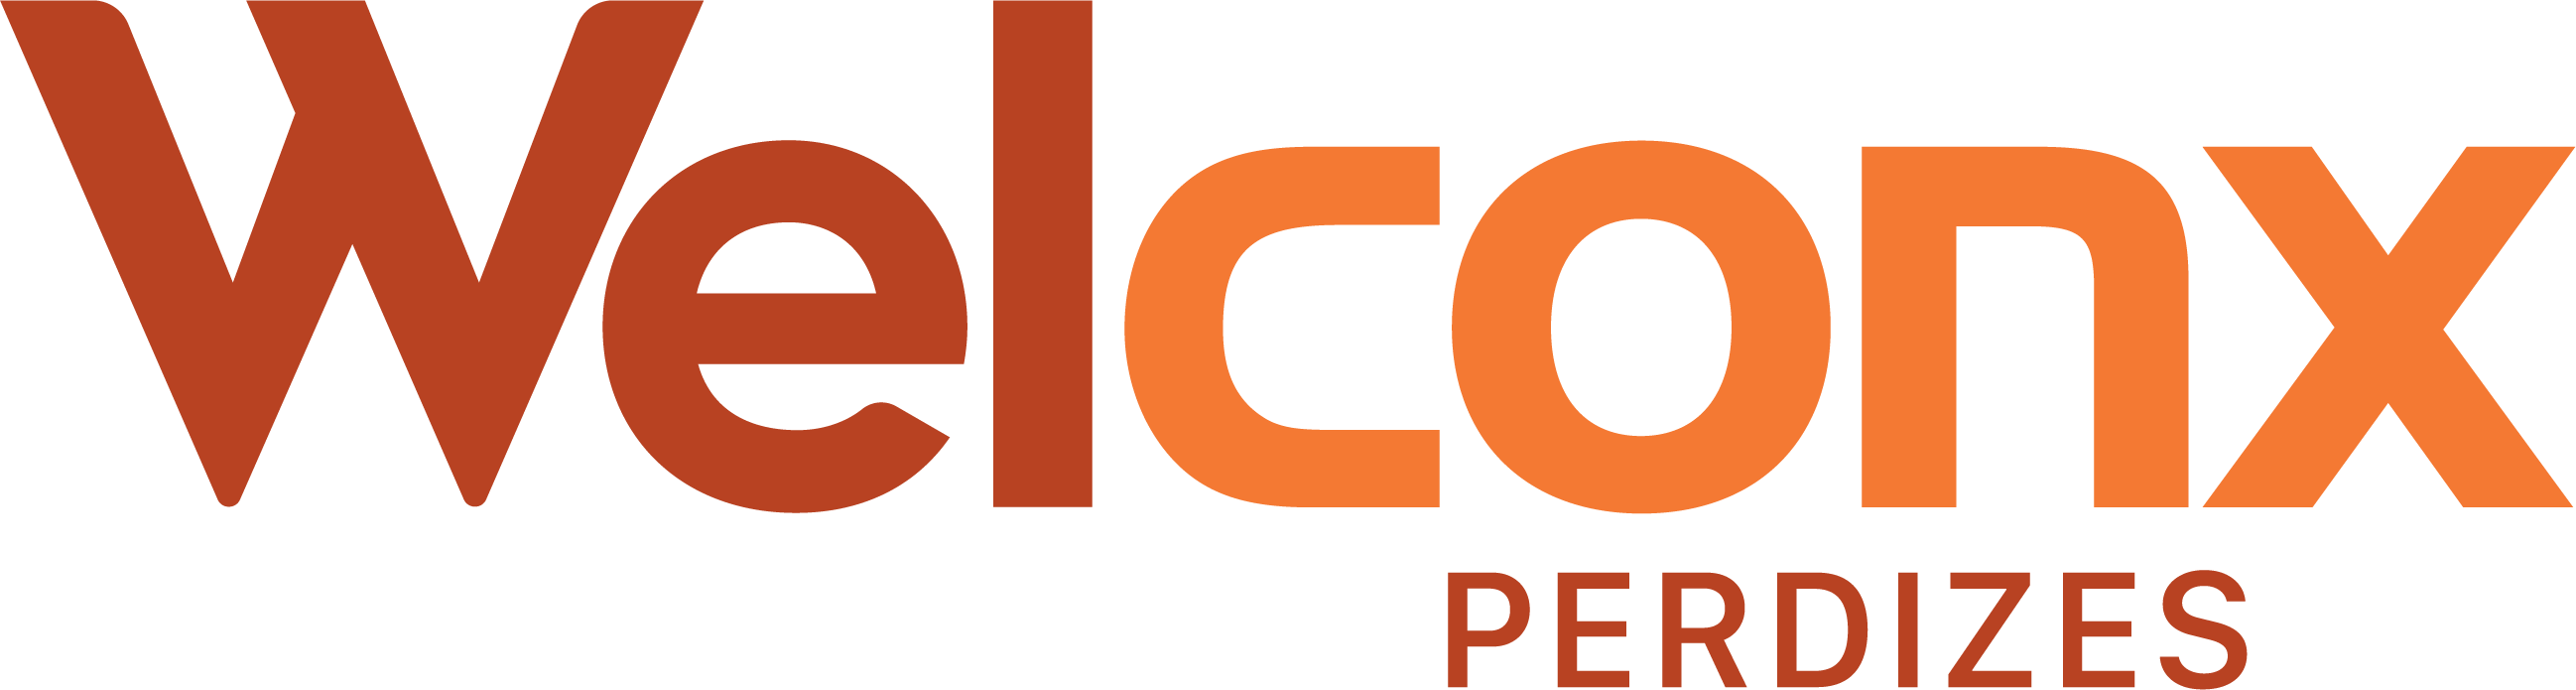 logo_welconx_perdize.png